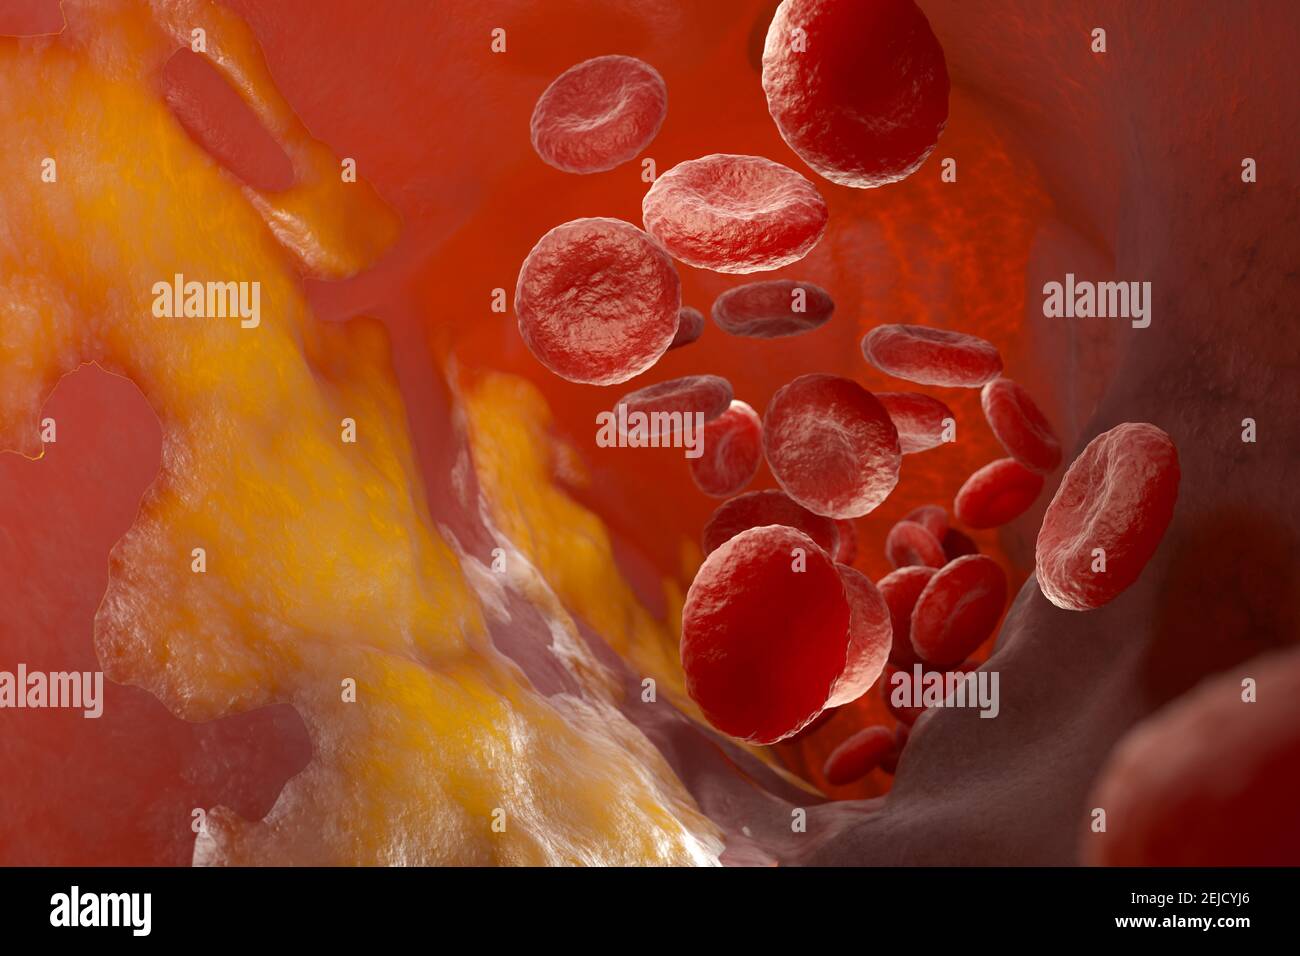 Cholesterol plaque in artery, Blood vessel with flowing blood cells. 3D illustration Stock Photo